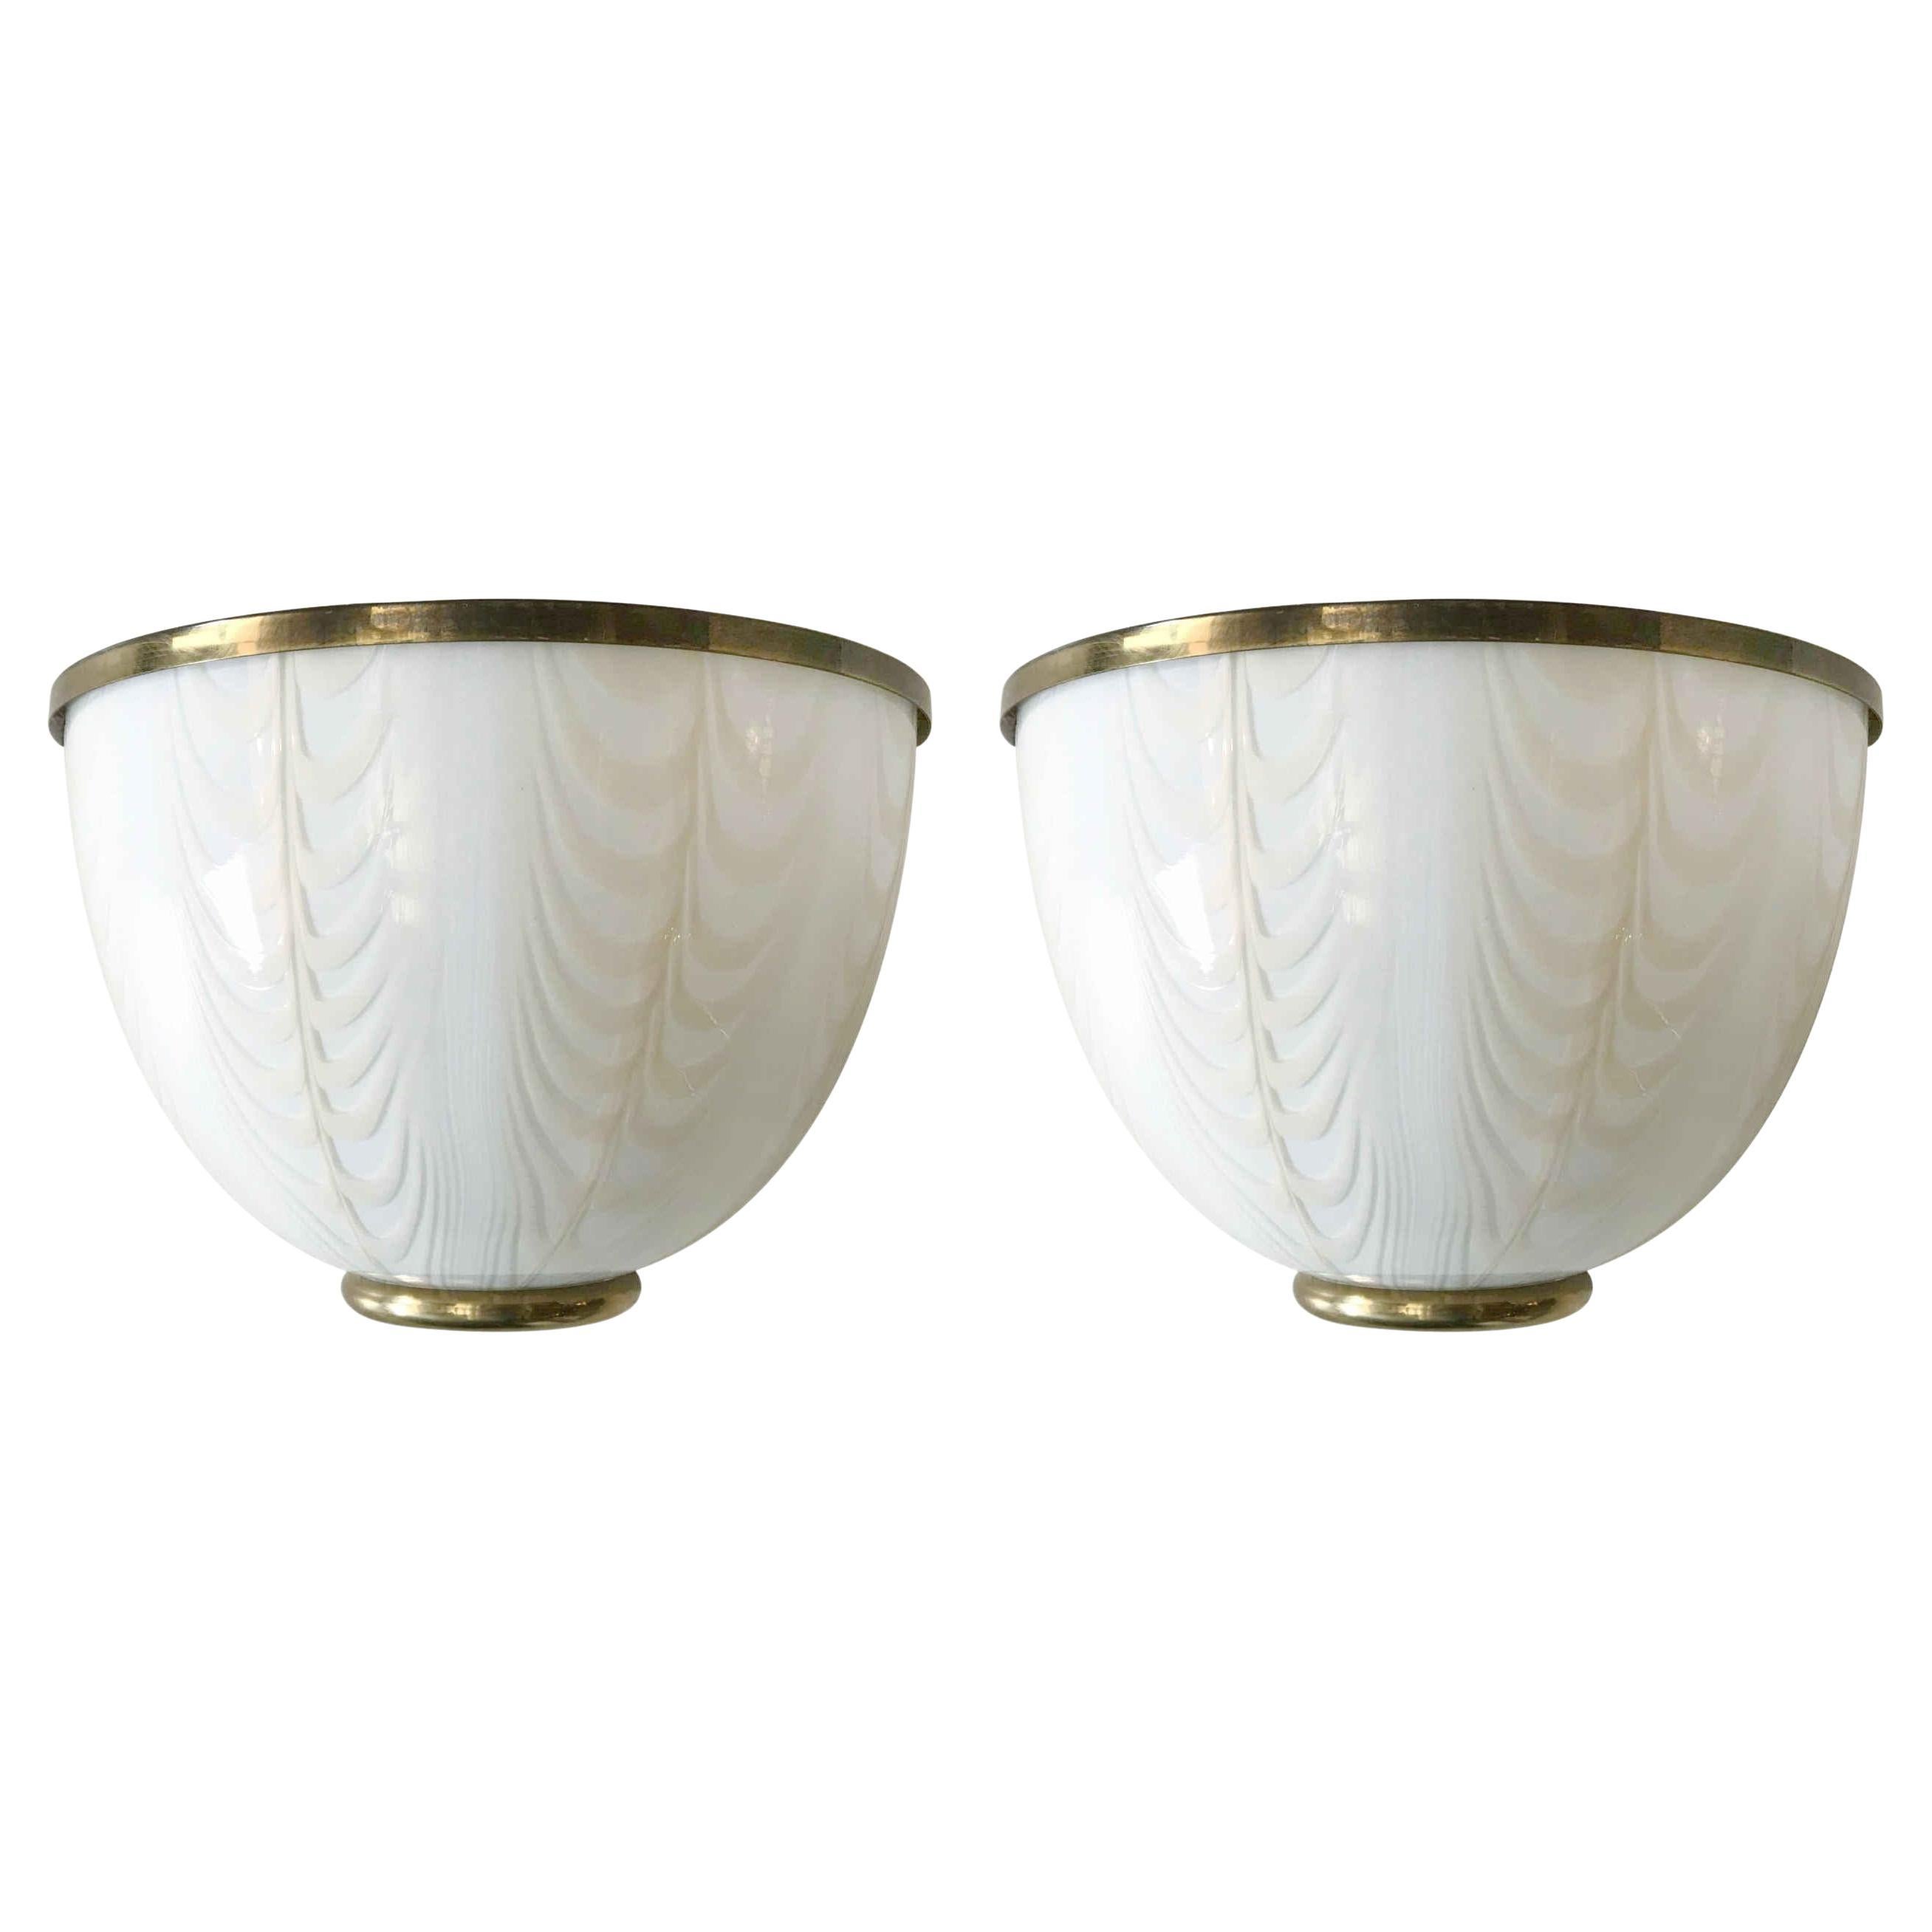 Pair of Murano Sconces by Fabbian for Mazzega - 2 Pairs Available For Sale